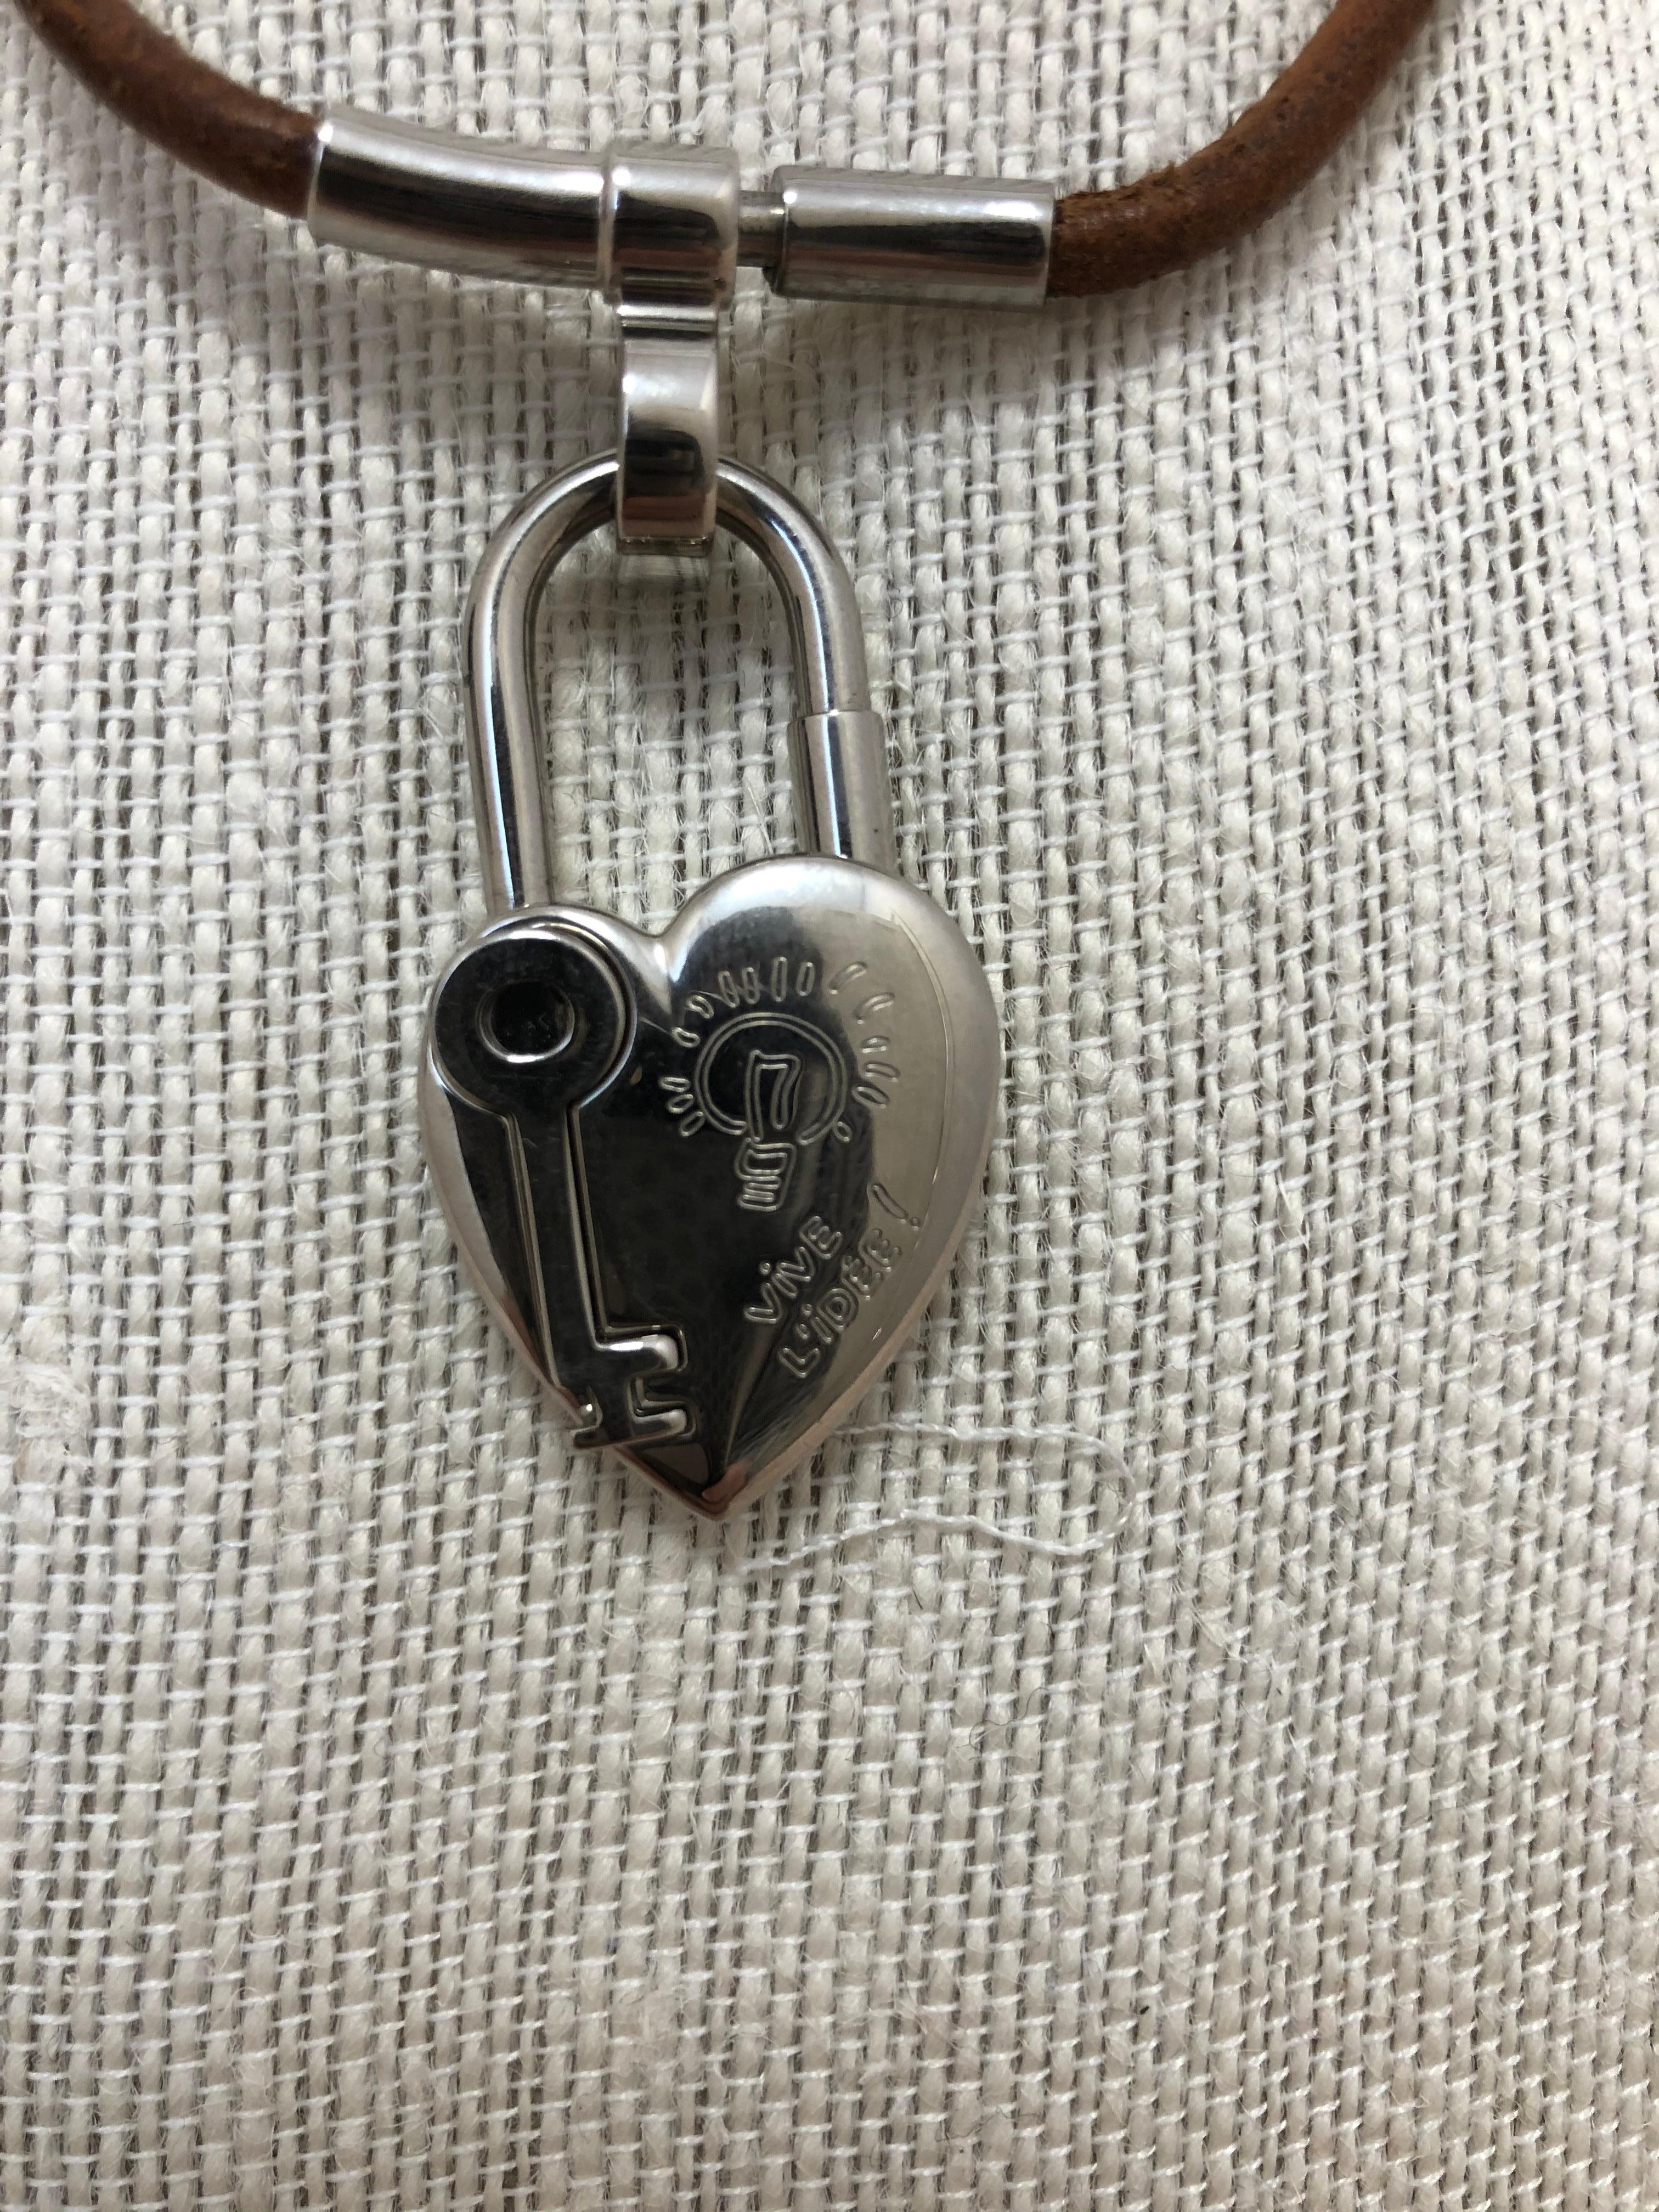 Lovely Hermes heart and key cadena with a leather choker strap. This is the type of necklace you can wear with everything anytime.